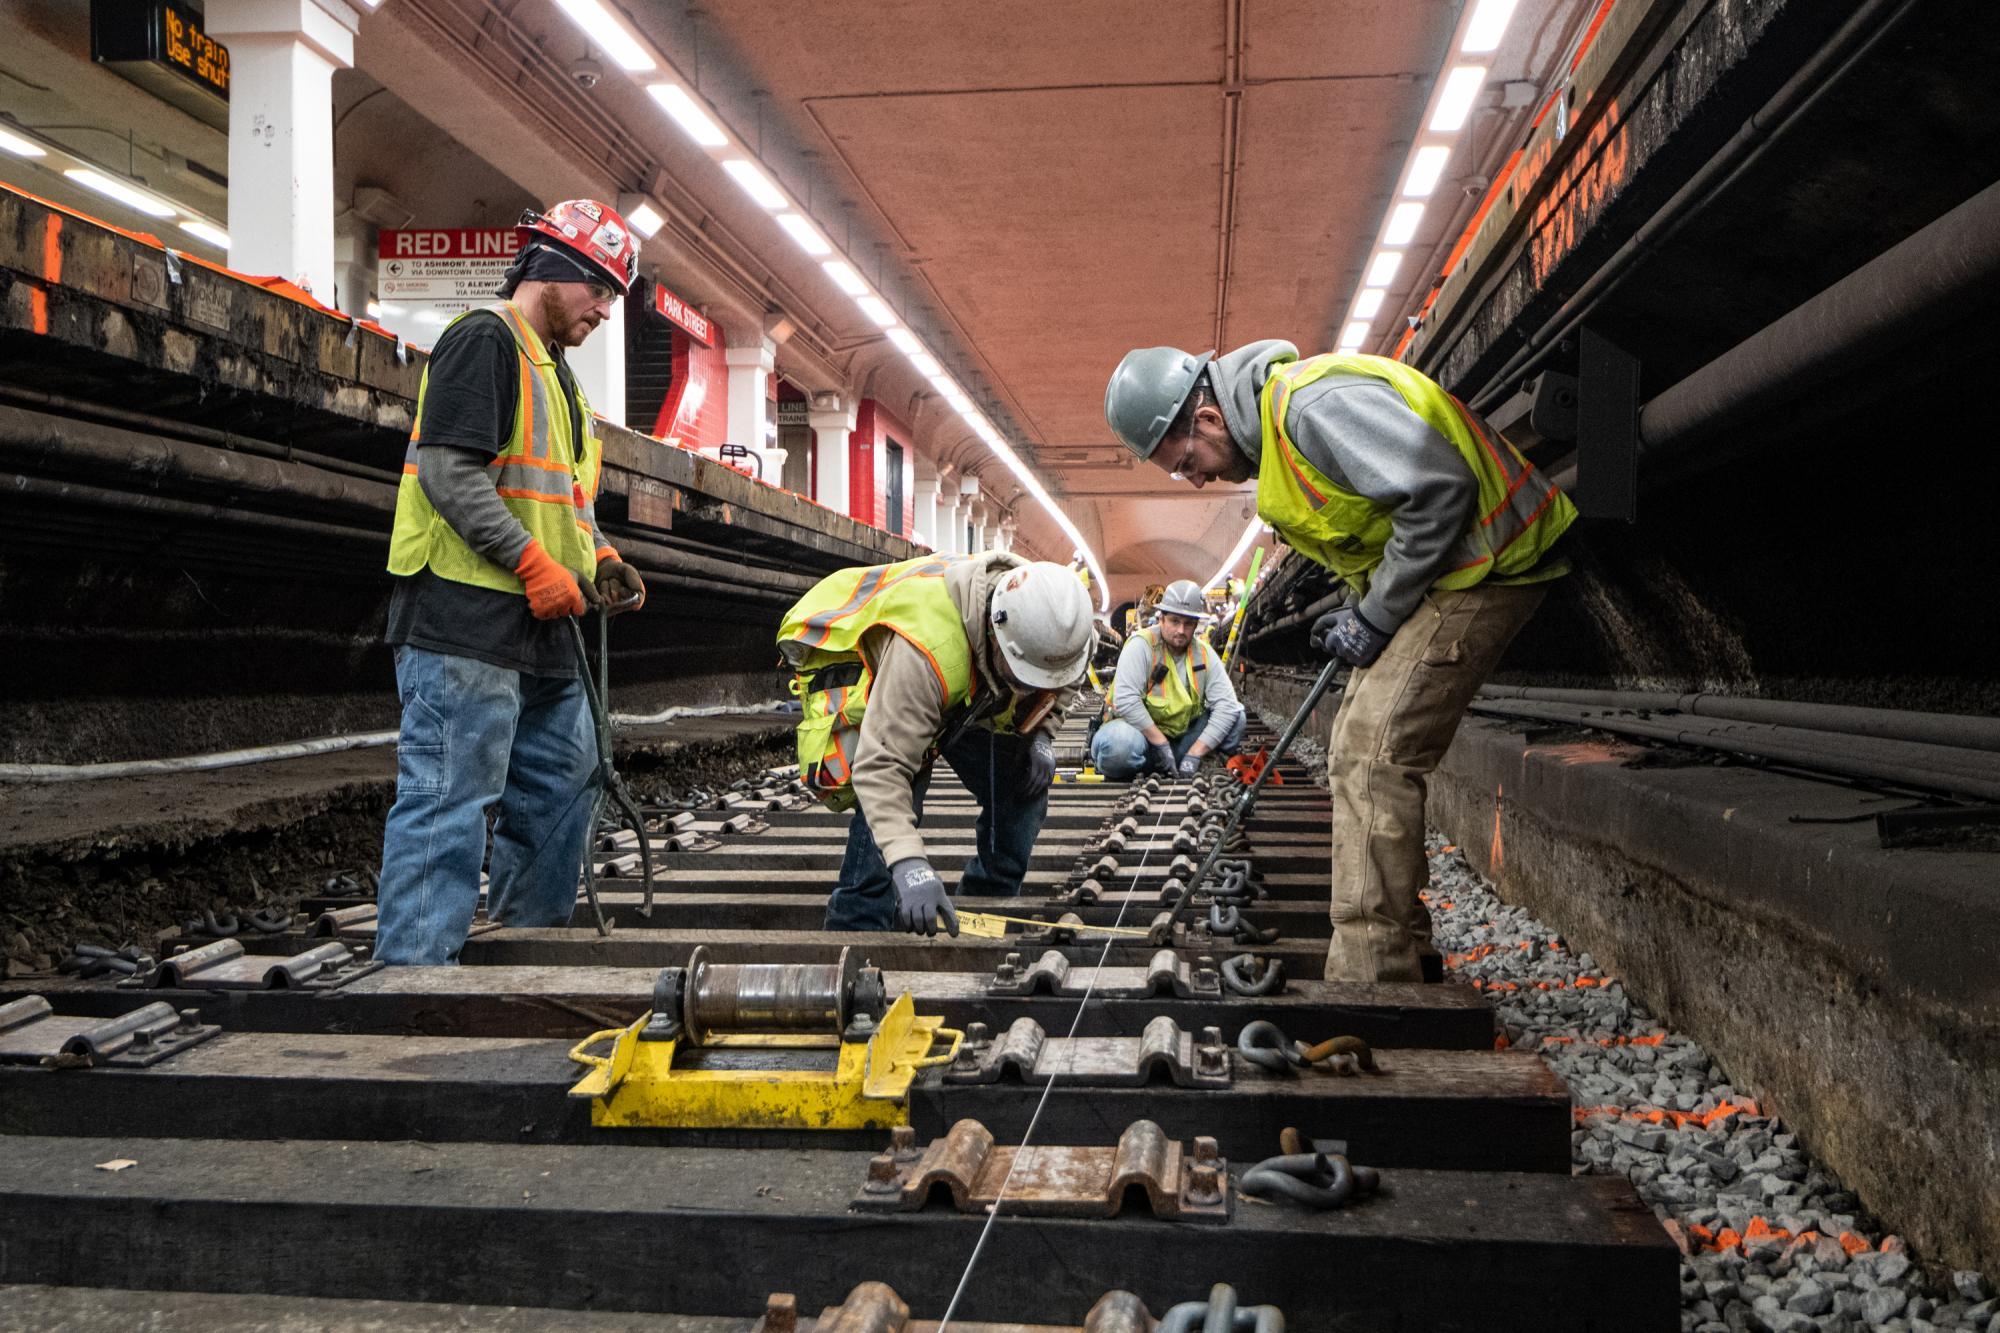 Crew members work on track replacement at Park St during the December 6 – 8, 2019, Red Line weekend shutdown